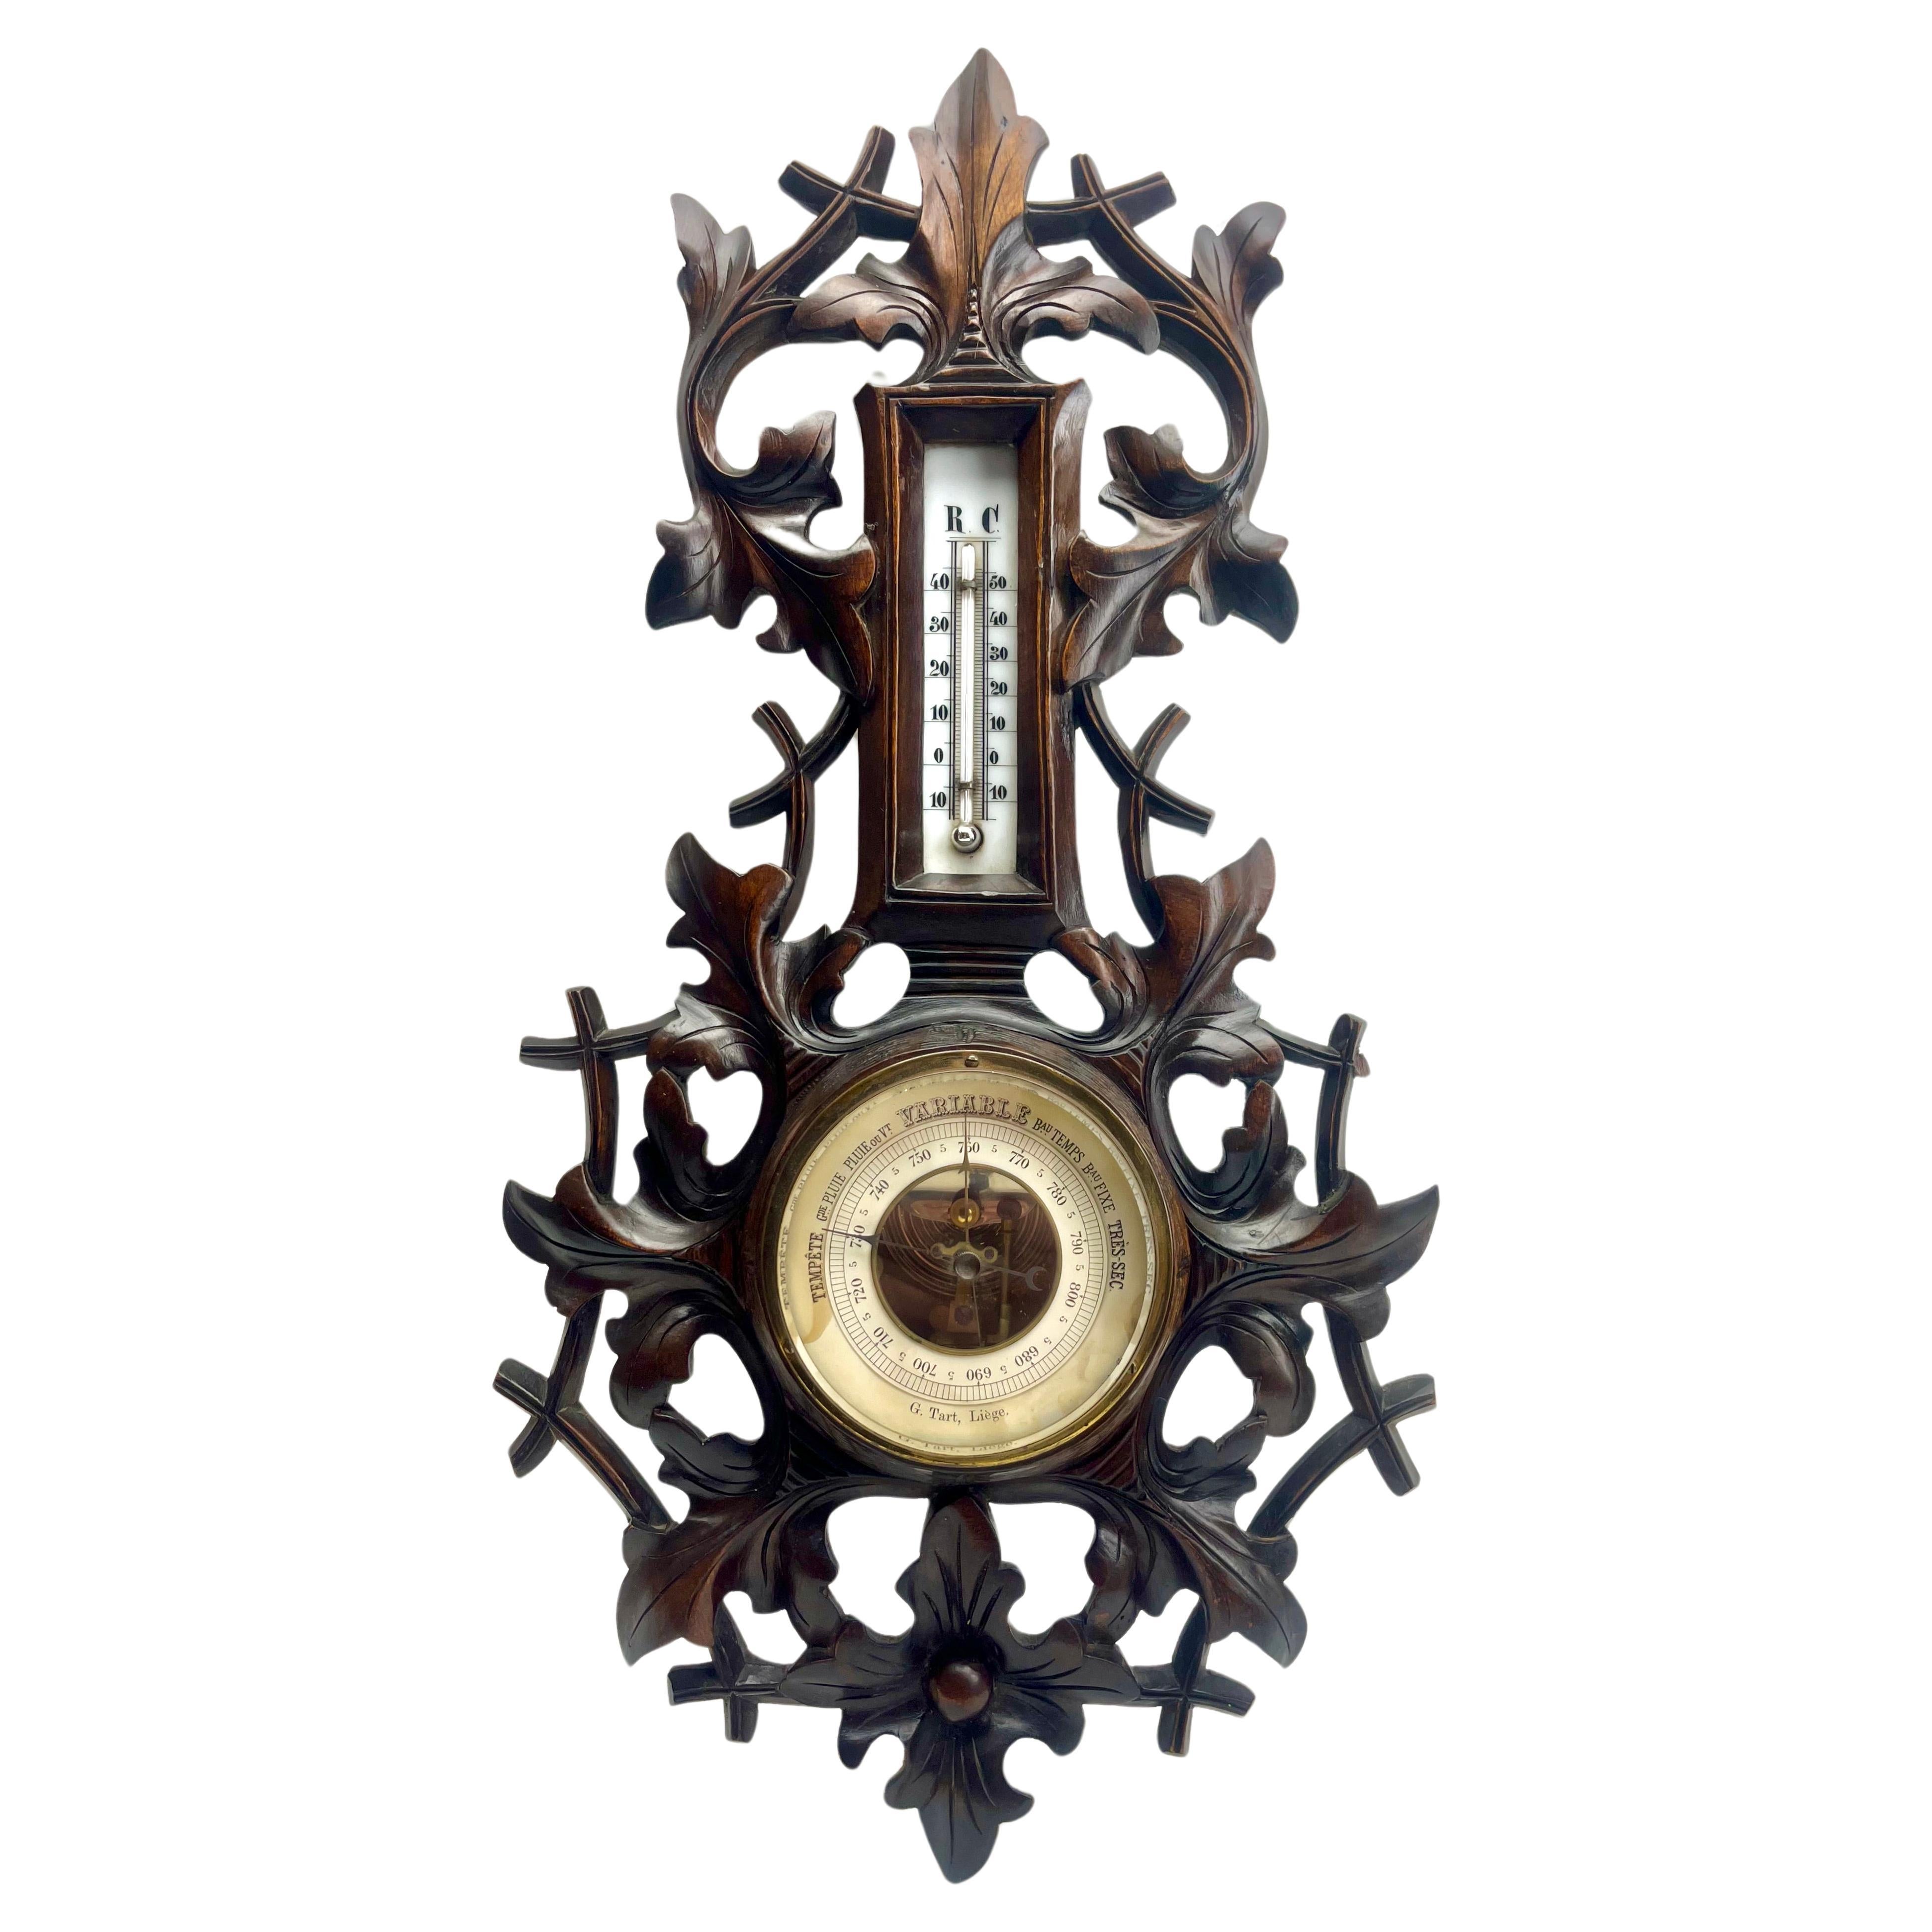 Wall-mounted weather station in carved walnut made in Liege Belgium by G.Tart. 
High quality mechanism with jeweled movement barometer and thermometer (in centigrade)
Unusual design with high relief C-scrolls and flowers in Rococo style (from theArt